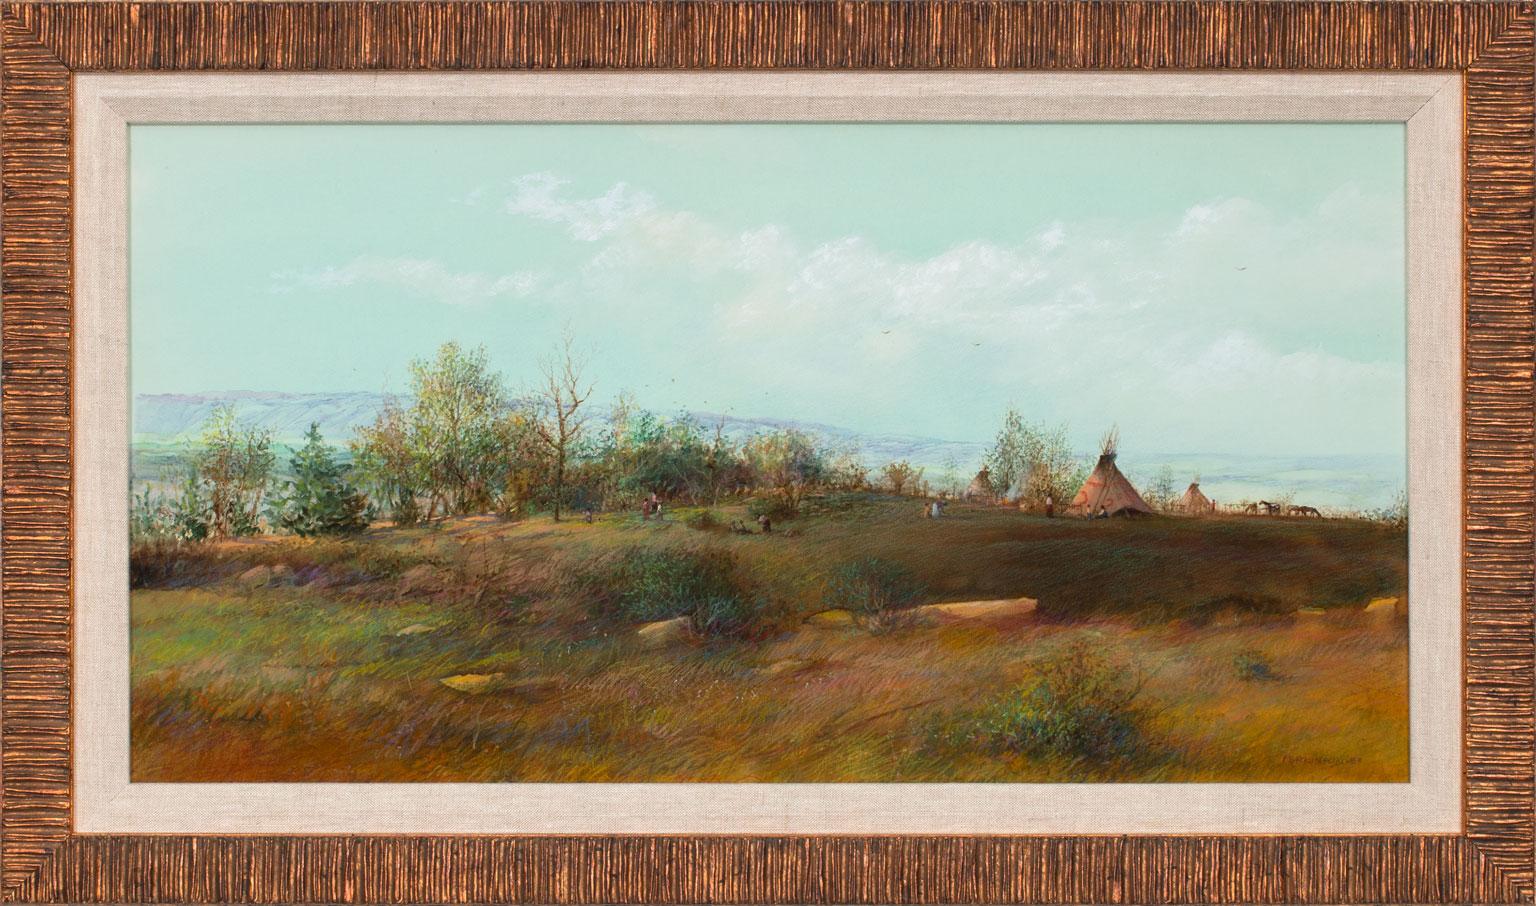 "Sioux Camp" Original Mixed Media on Paper Landscape by Tom Perkinson, Framed